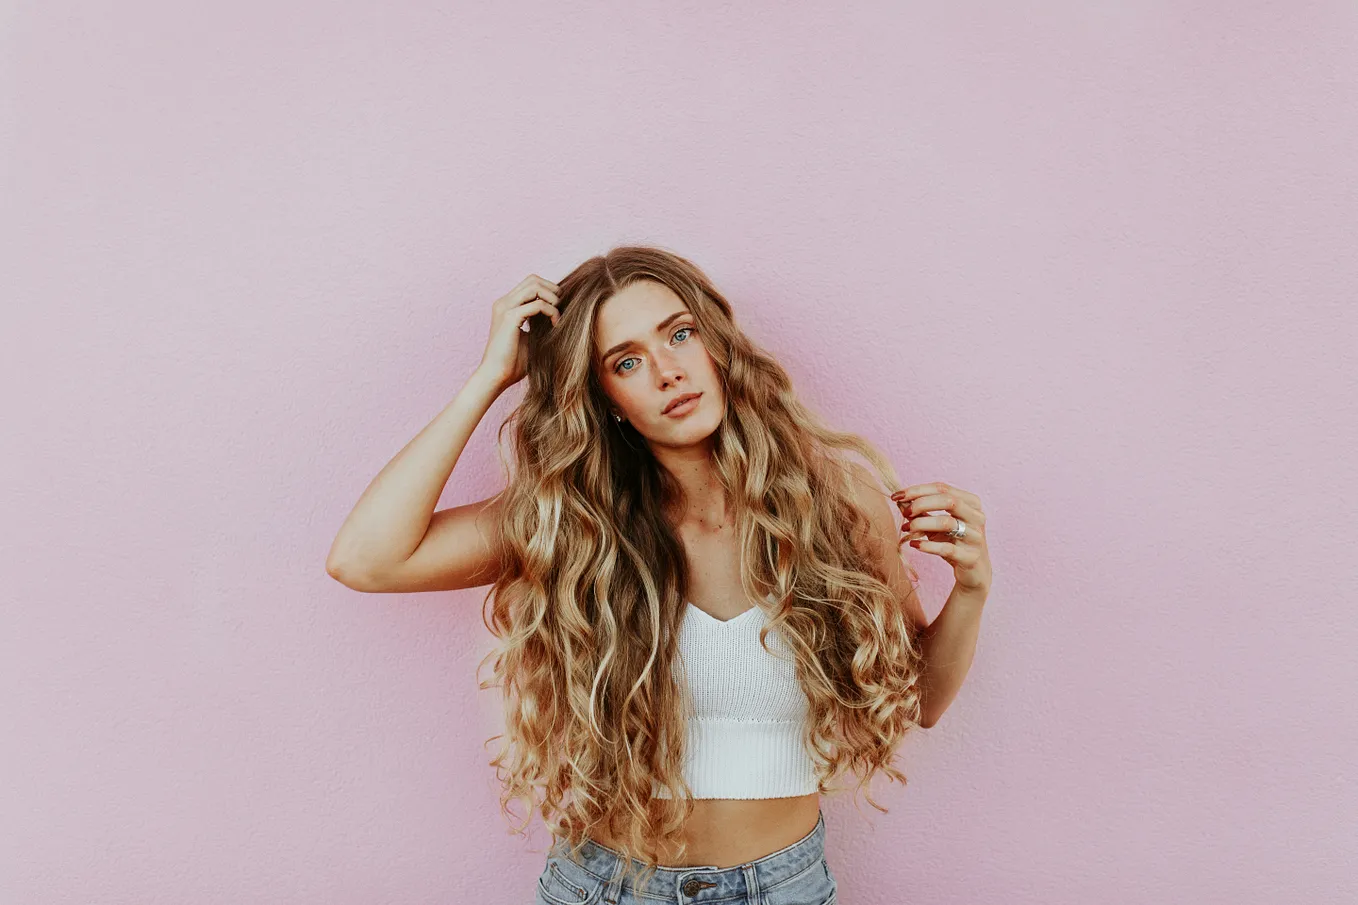 Girl with long curly hair against a mauve background